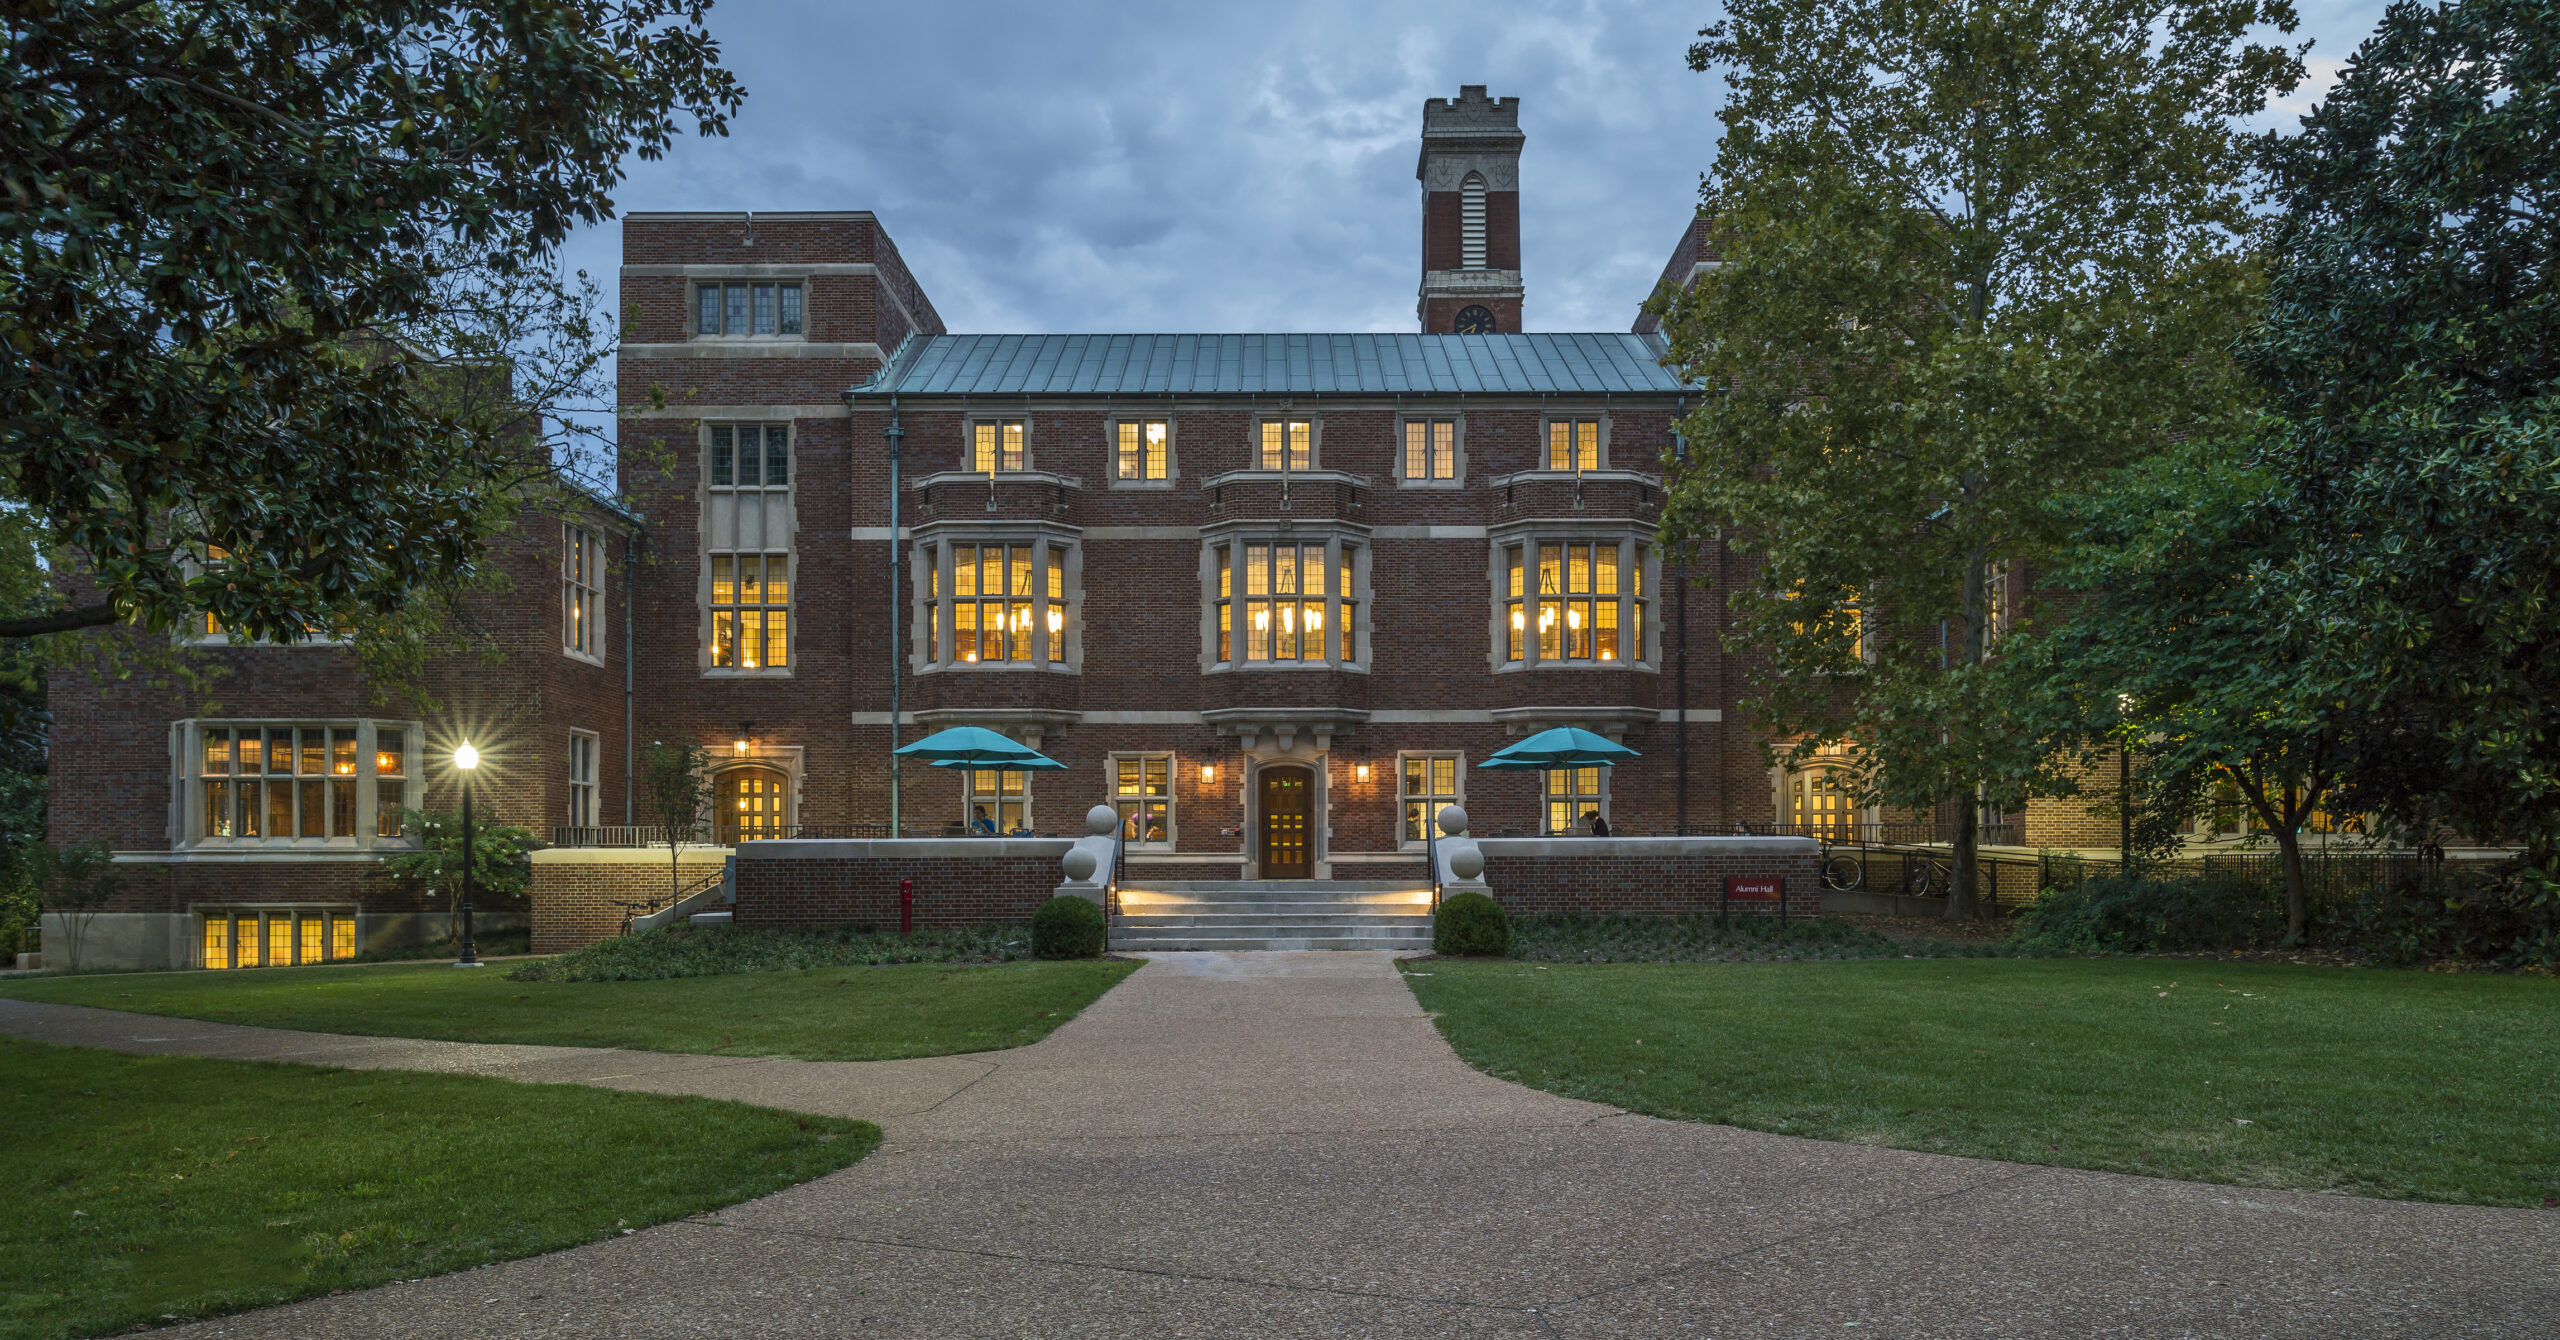 A picture of a stately brick building, sitting at the end of a footpath amid a lawn. The lighting is dusky, emphasizing the lights on in every window.